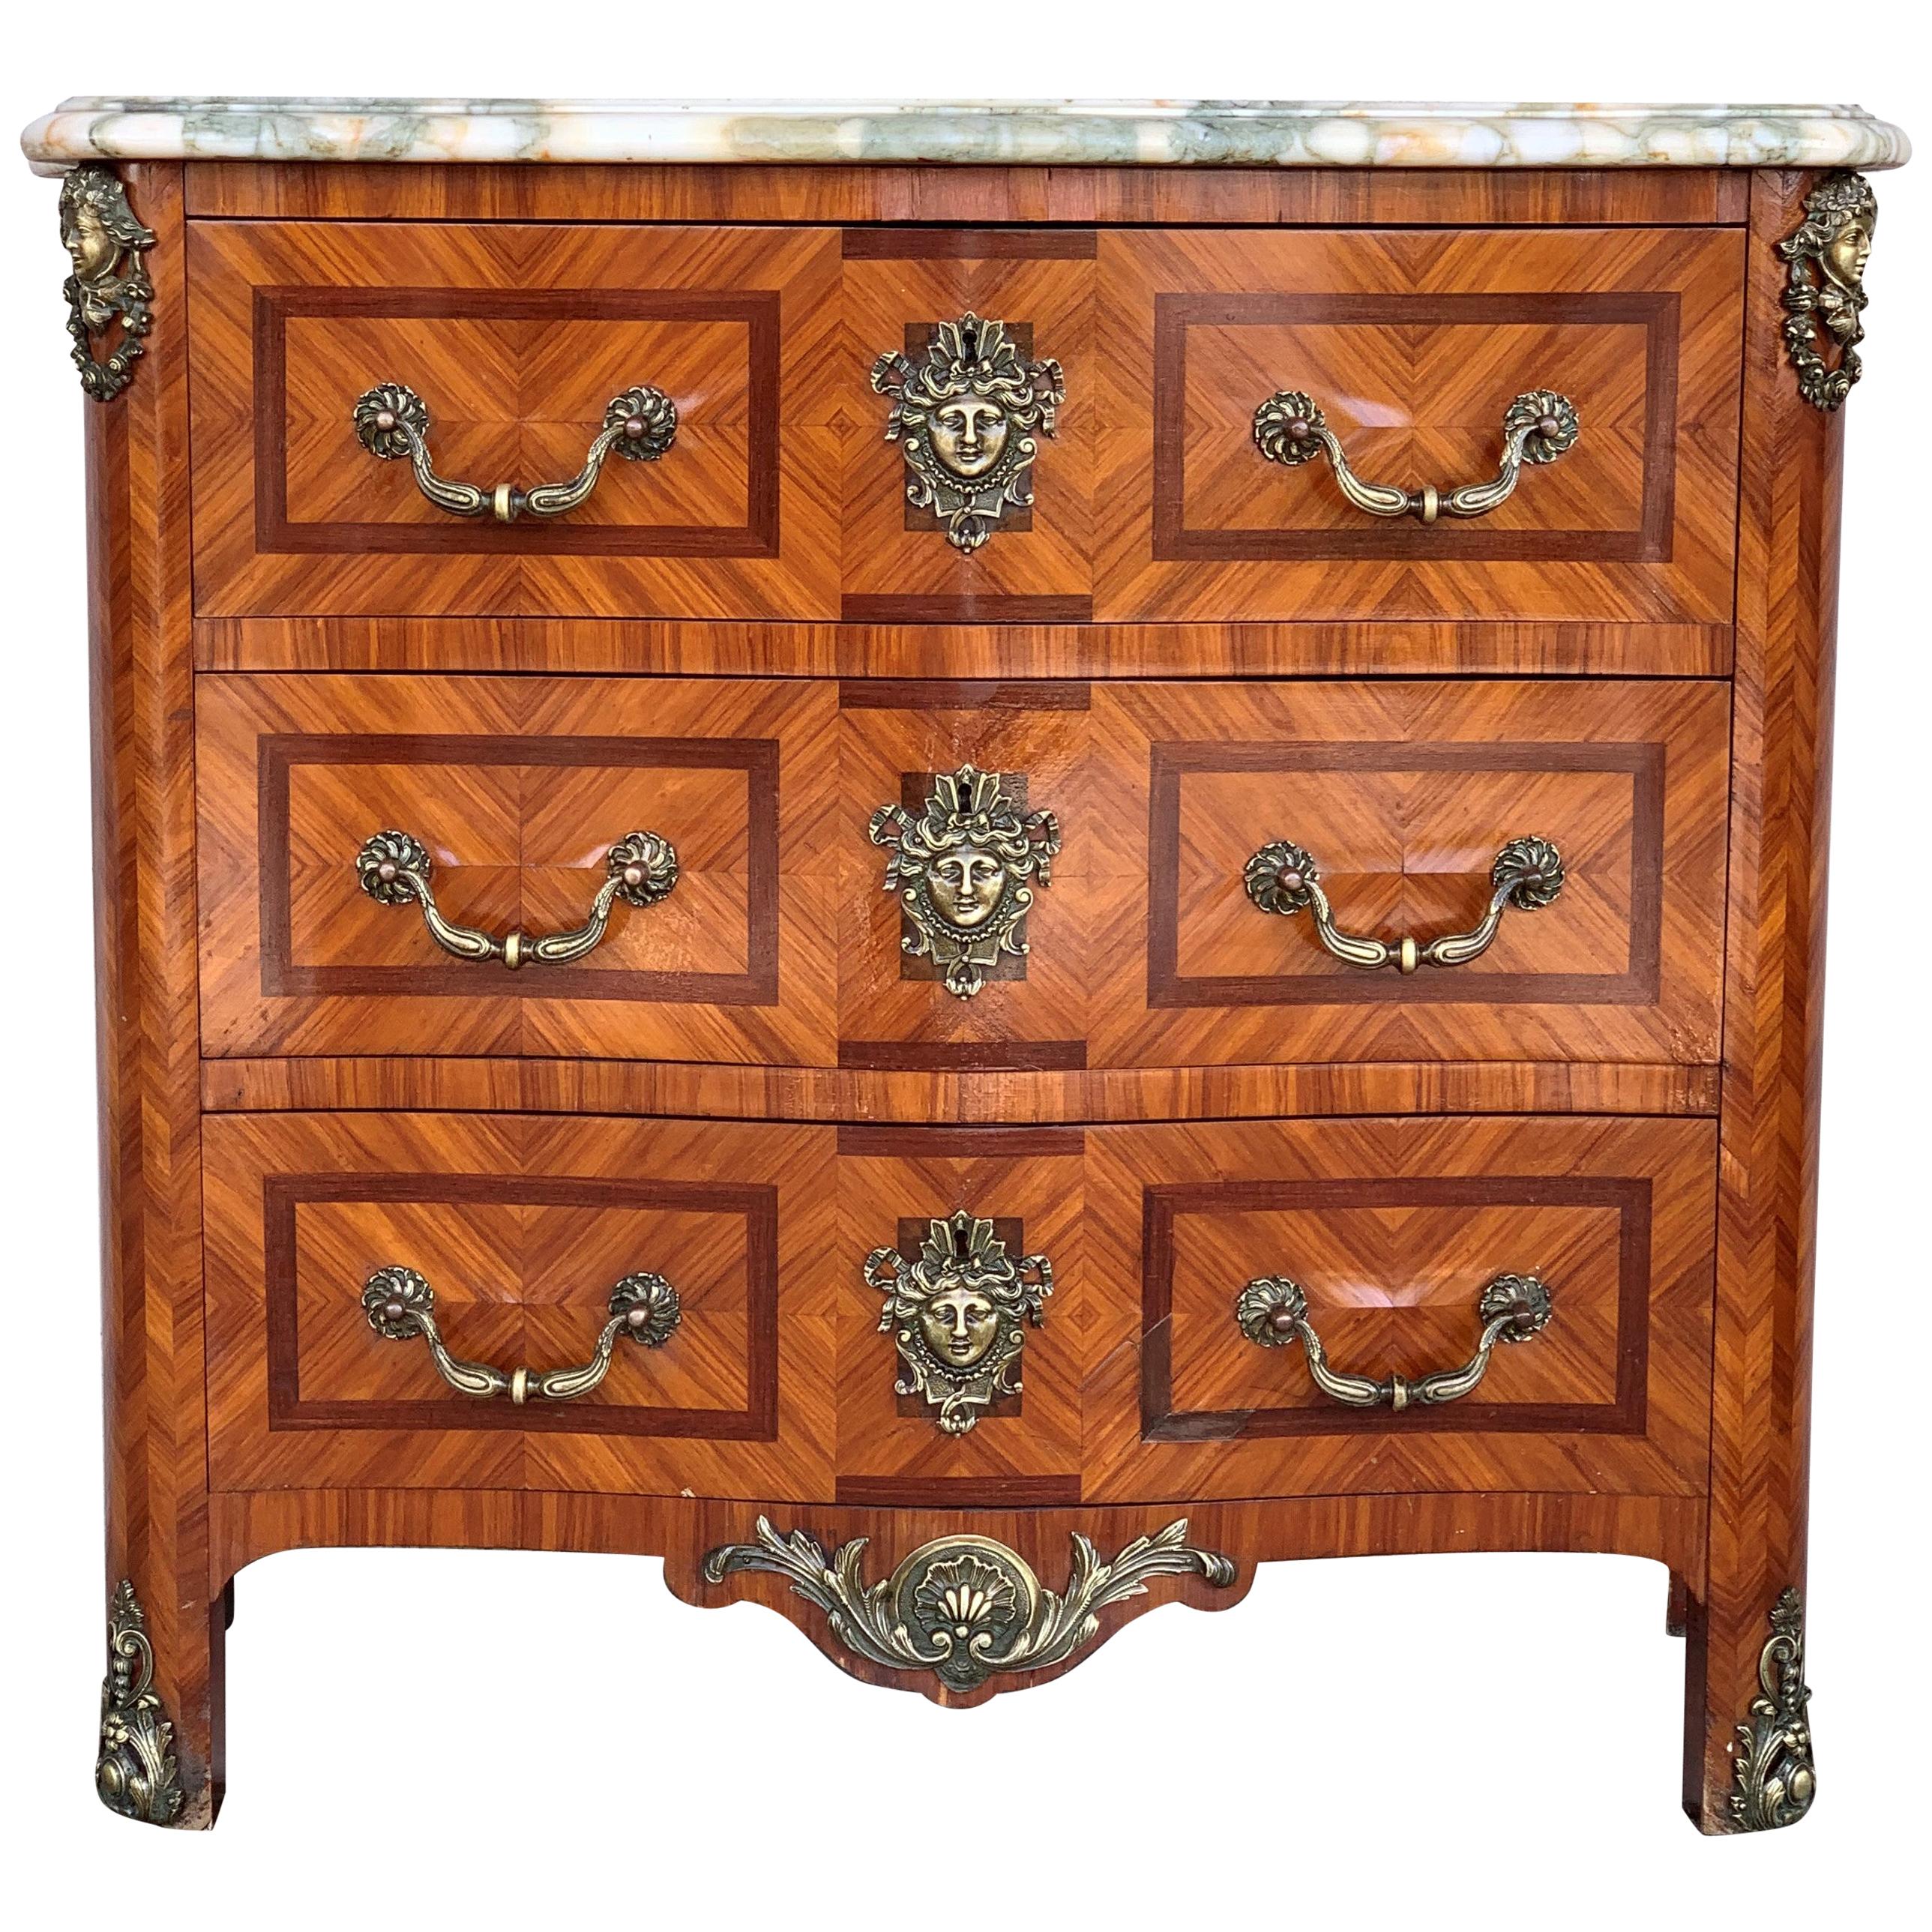 Early 20th Century Italian Period Baroque Sepentine Chest with Marquetry